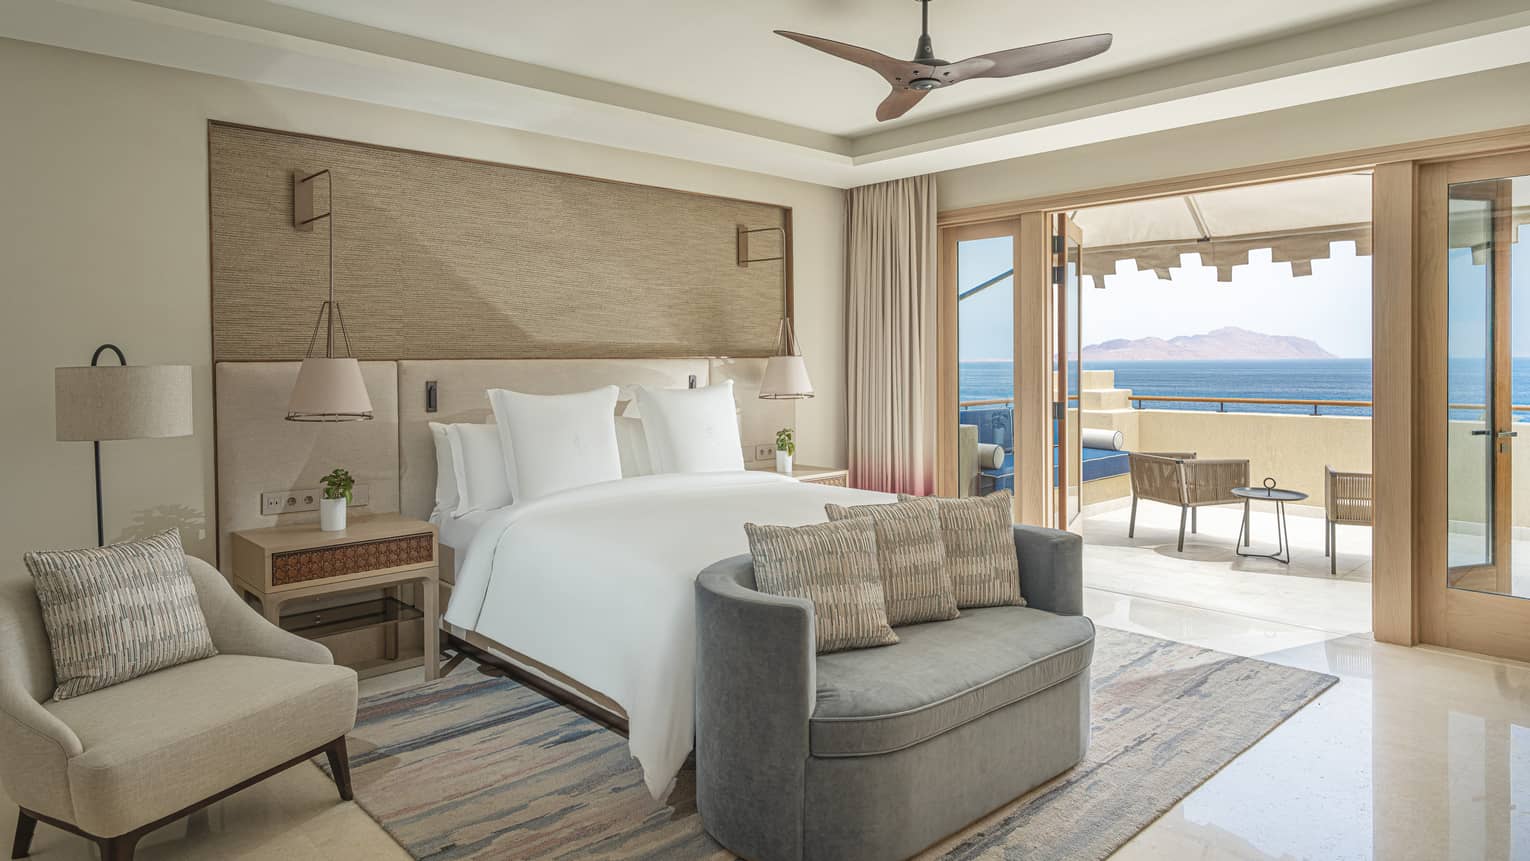 Four Seasons Suite bedroom with foot-of-the-bed chaise longue, arm chair, doorway to terrace with sea views